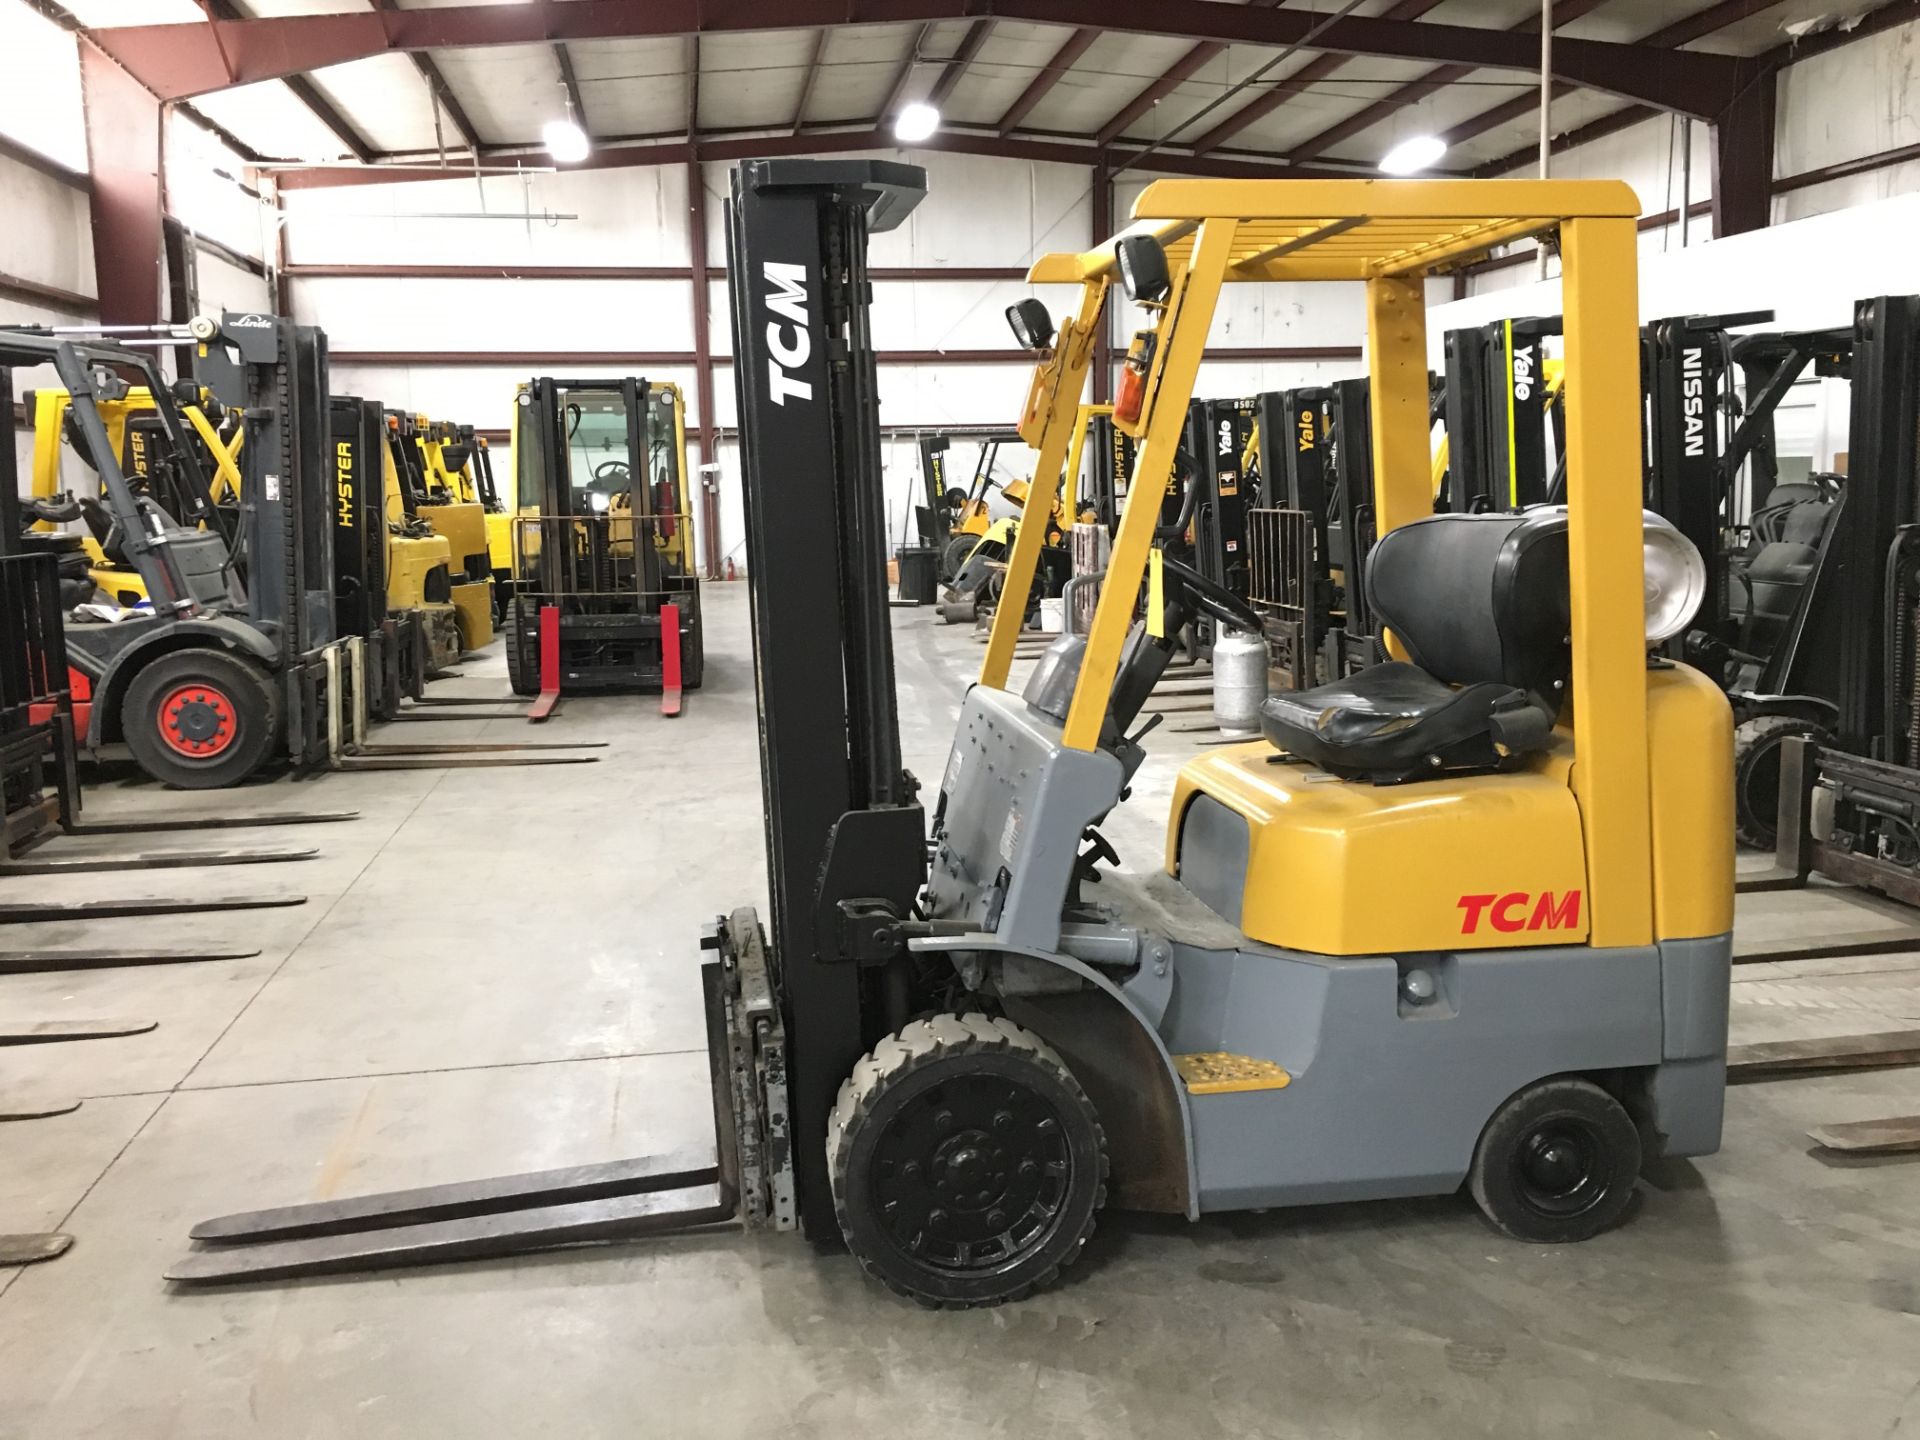 TCM 3,000-LB., MODEL: FCG15F9, S/N: A12R01063, LPG, LEVER SHIFT, SOLID TIRES, 3-STAGE MAST, 189'`